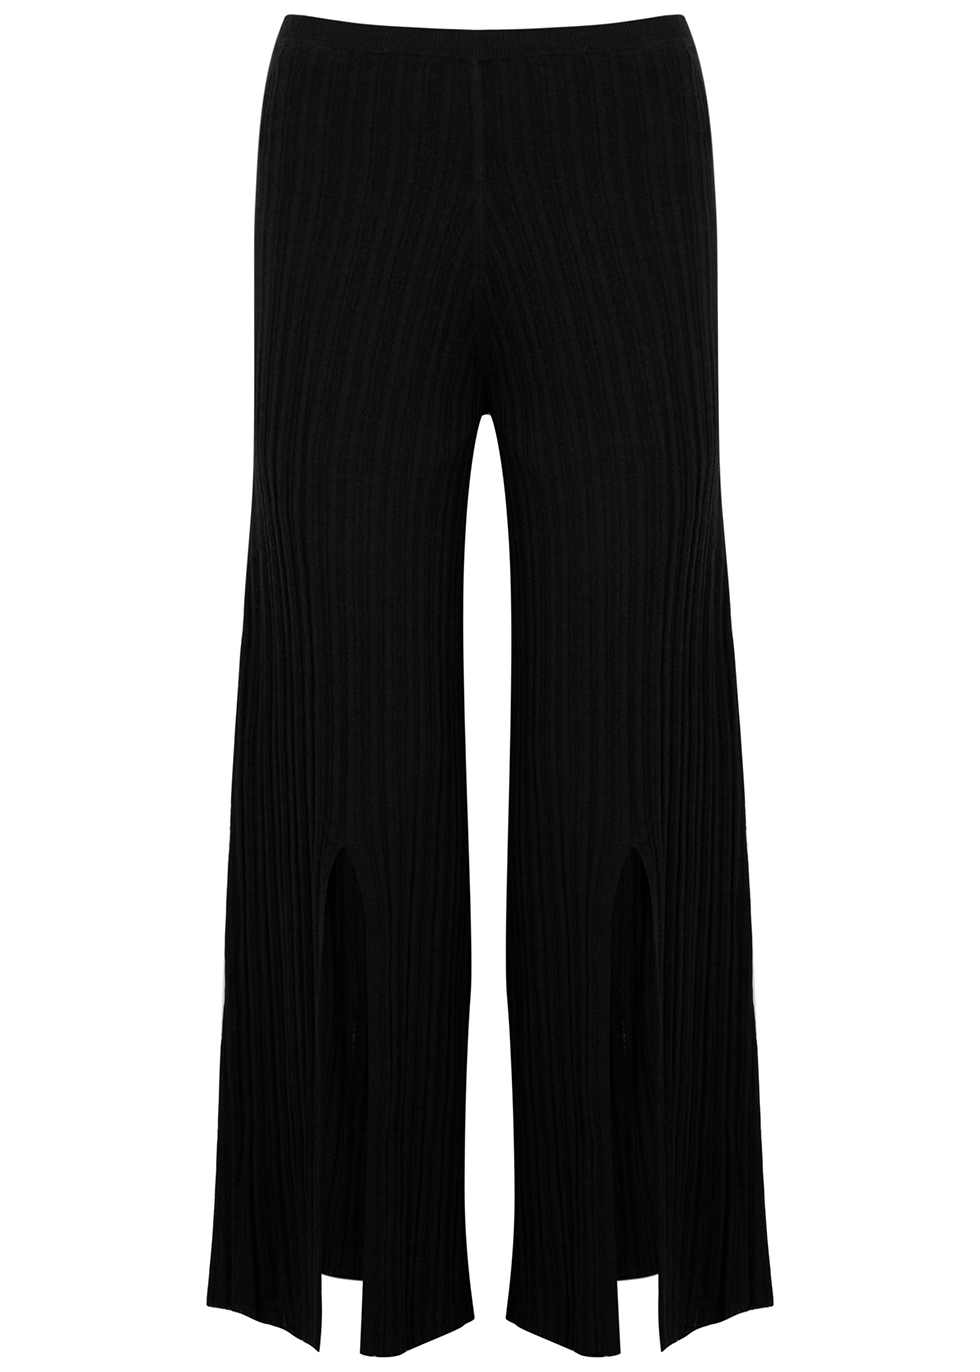 BY MALENE BIRGER IRVAN BLACK RIBBED-KNIT TROUSERS